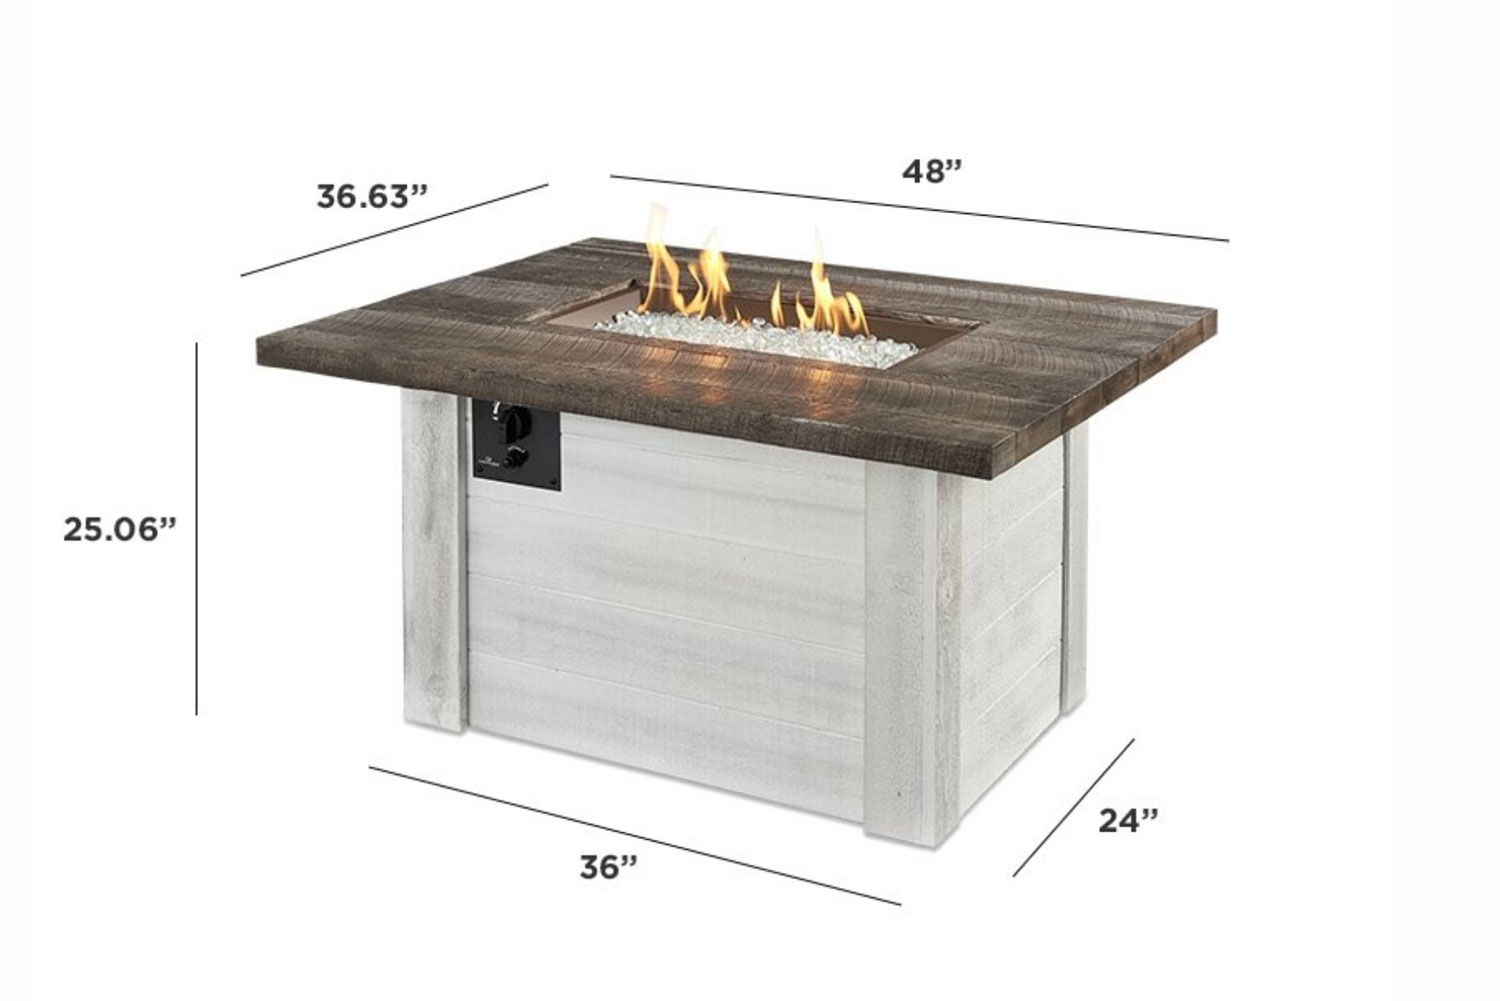 Alcott Fire Pit Specifications